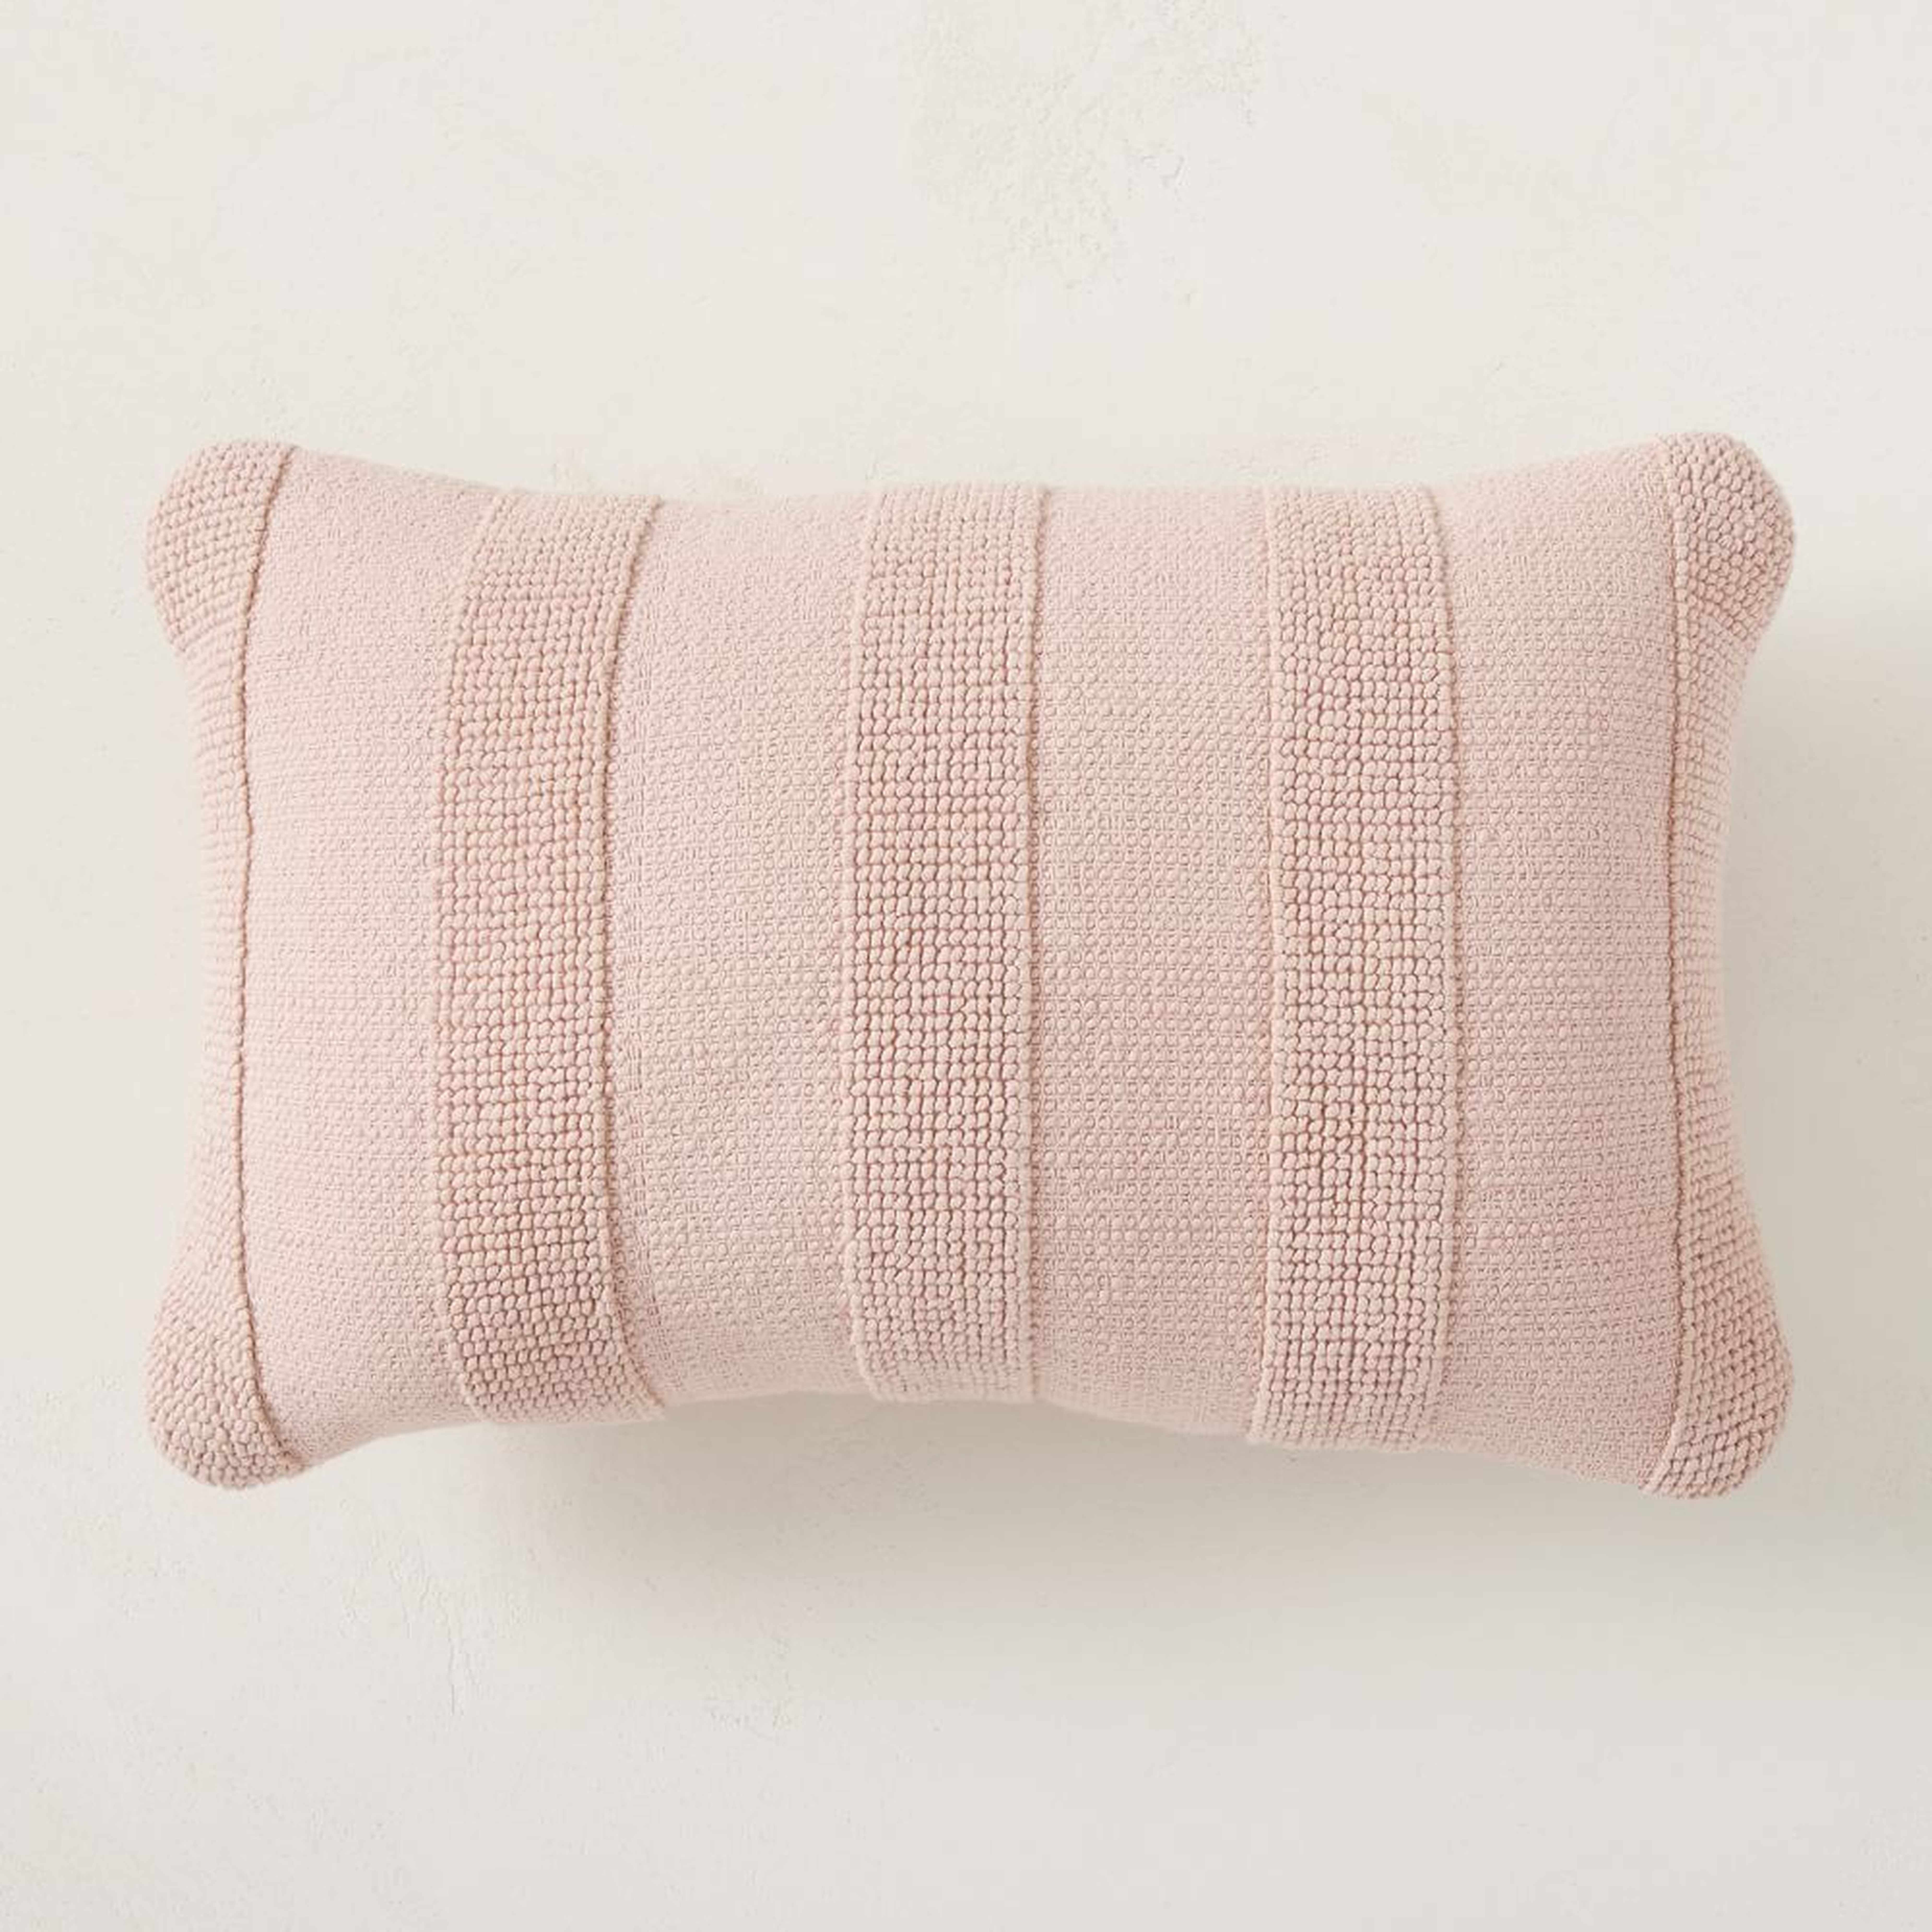 Outdoor Tufted Stripe Pillow, 12"x21", Pink Stone - West Elm